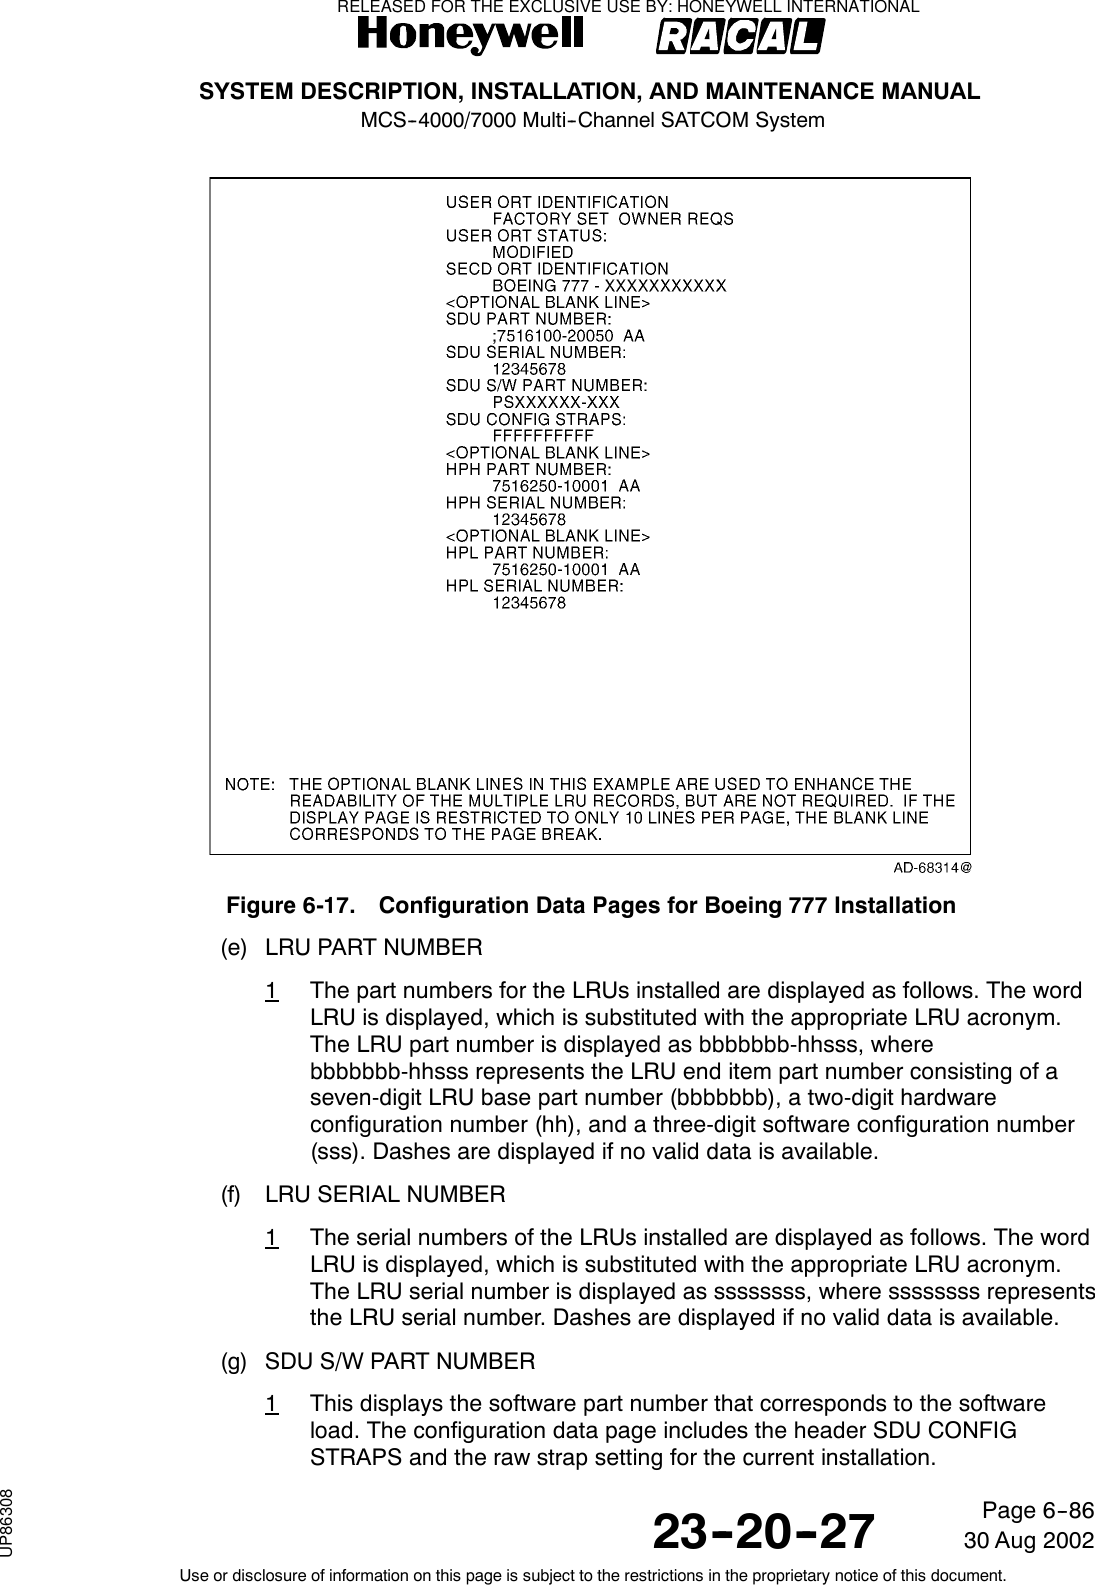 SYSTEM DESCRIPTION, INSTALLATION, AND MAINTENANCE MANUALMCS--4000/7000 Multi--Channel SATCOM System23--20--2730 Aug 2002Use or disclosure of information on this page is subject to the restrictions in the proprietary notice of this document.Page 6--86Figure 6-17. Configuration Data Pages for Boeing 777 Installation(e) LRU PART NUMBER1The part numbers for the LRUs installed are displayed as follows. The wordLRU is displayed, which is substituted with the appropriate LRU acronym.The LRU part number is displayed as bbbbbbb-hhsss, wherebbbbbbb-hhsss represents the LRU end item part number consisting of aseven-digit LRU base part number (bbbbbbb), a two-digit hardwareconfiguration number (hh), and a three-digit software configuration number(sss). Dashes are displayed if no valid data is available.(f) LRU SERIAL NUMBER1The serial numbers of the LRUs installed are displayed as follows. The wordLRU is displayed, which is substituted with the appropriate LRU acronym.The LRU serial number is displayed as ssssssss, where ssssssss representsthe LRU serial number. Dashes are displayed if no valid data is available.(g) SDU S/W PART NUMBER1This displays the software part number that corresponds to the softwareload. The configuration data page includes the header SDU CONFIGSTRAPS and the raw strap setting for the current installation.RELEASED FOR THE EXCLUSIVE USE BY: HONEYWELL INTERNATIONALUP86308